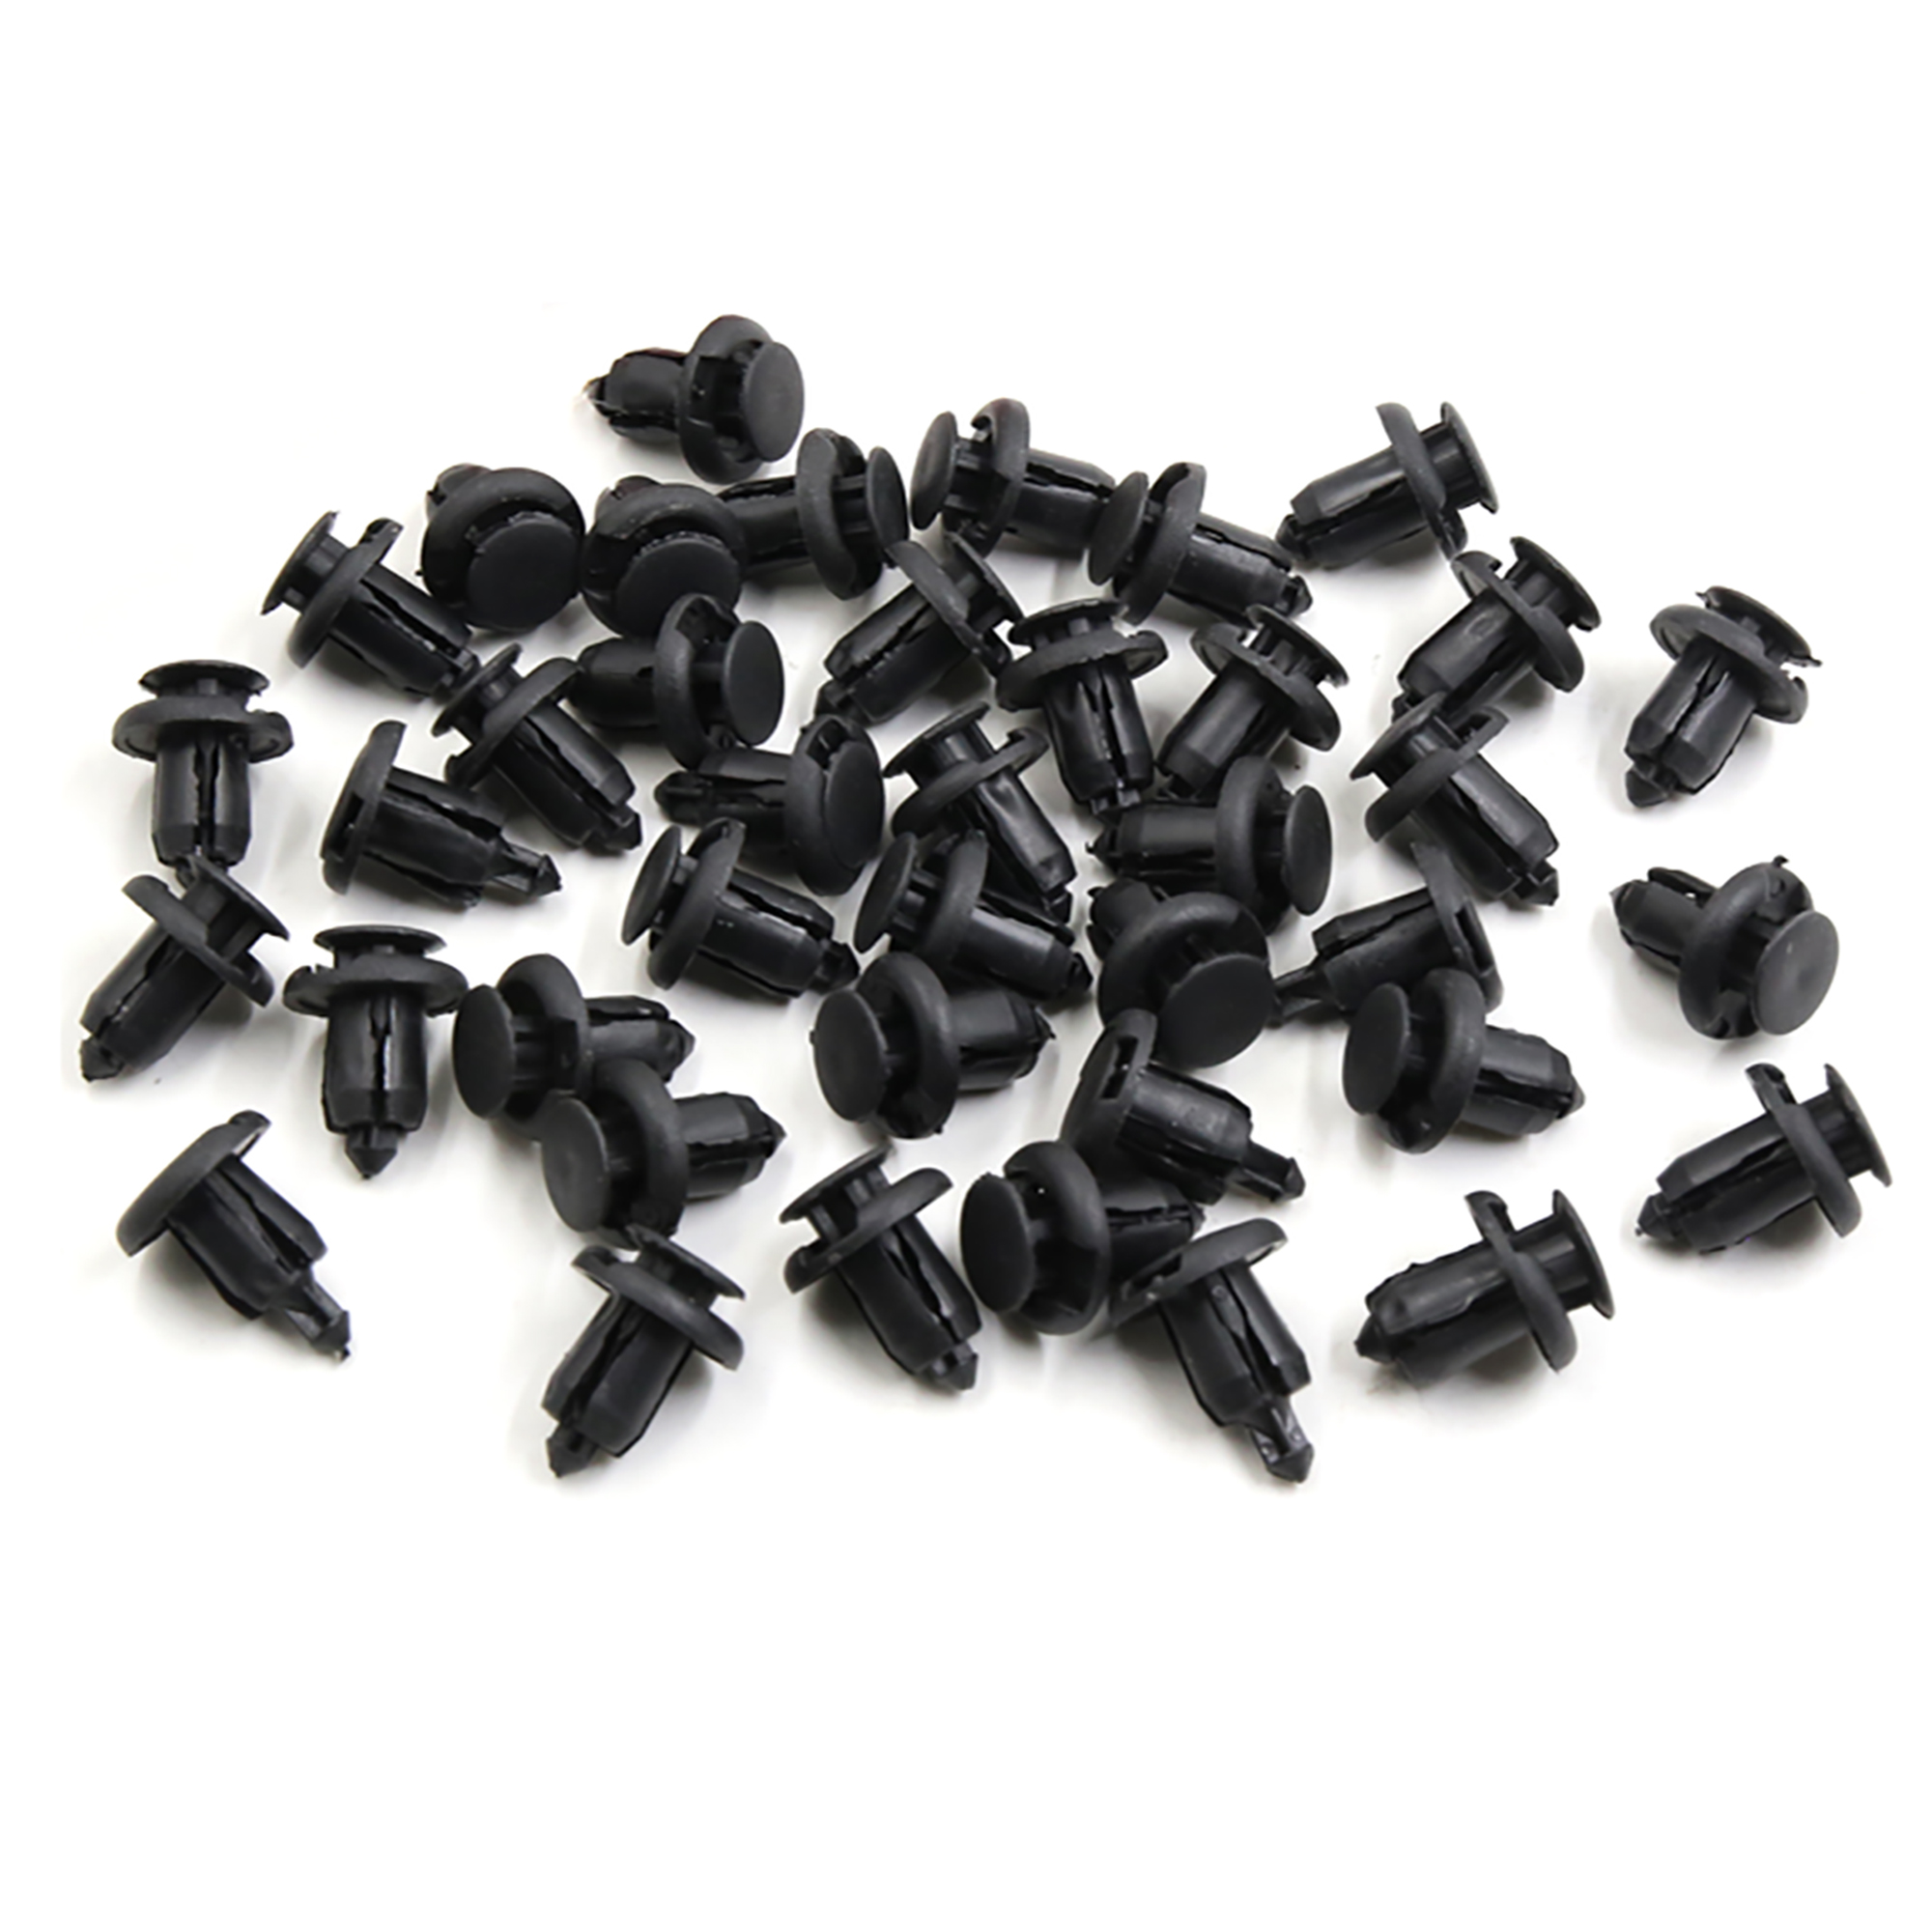 Lantee 20 Pcs Engine Under Cover Push-Type Retainer Clips Replaces for - 2